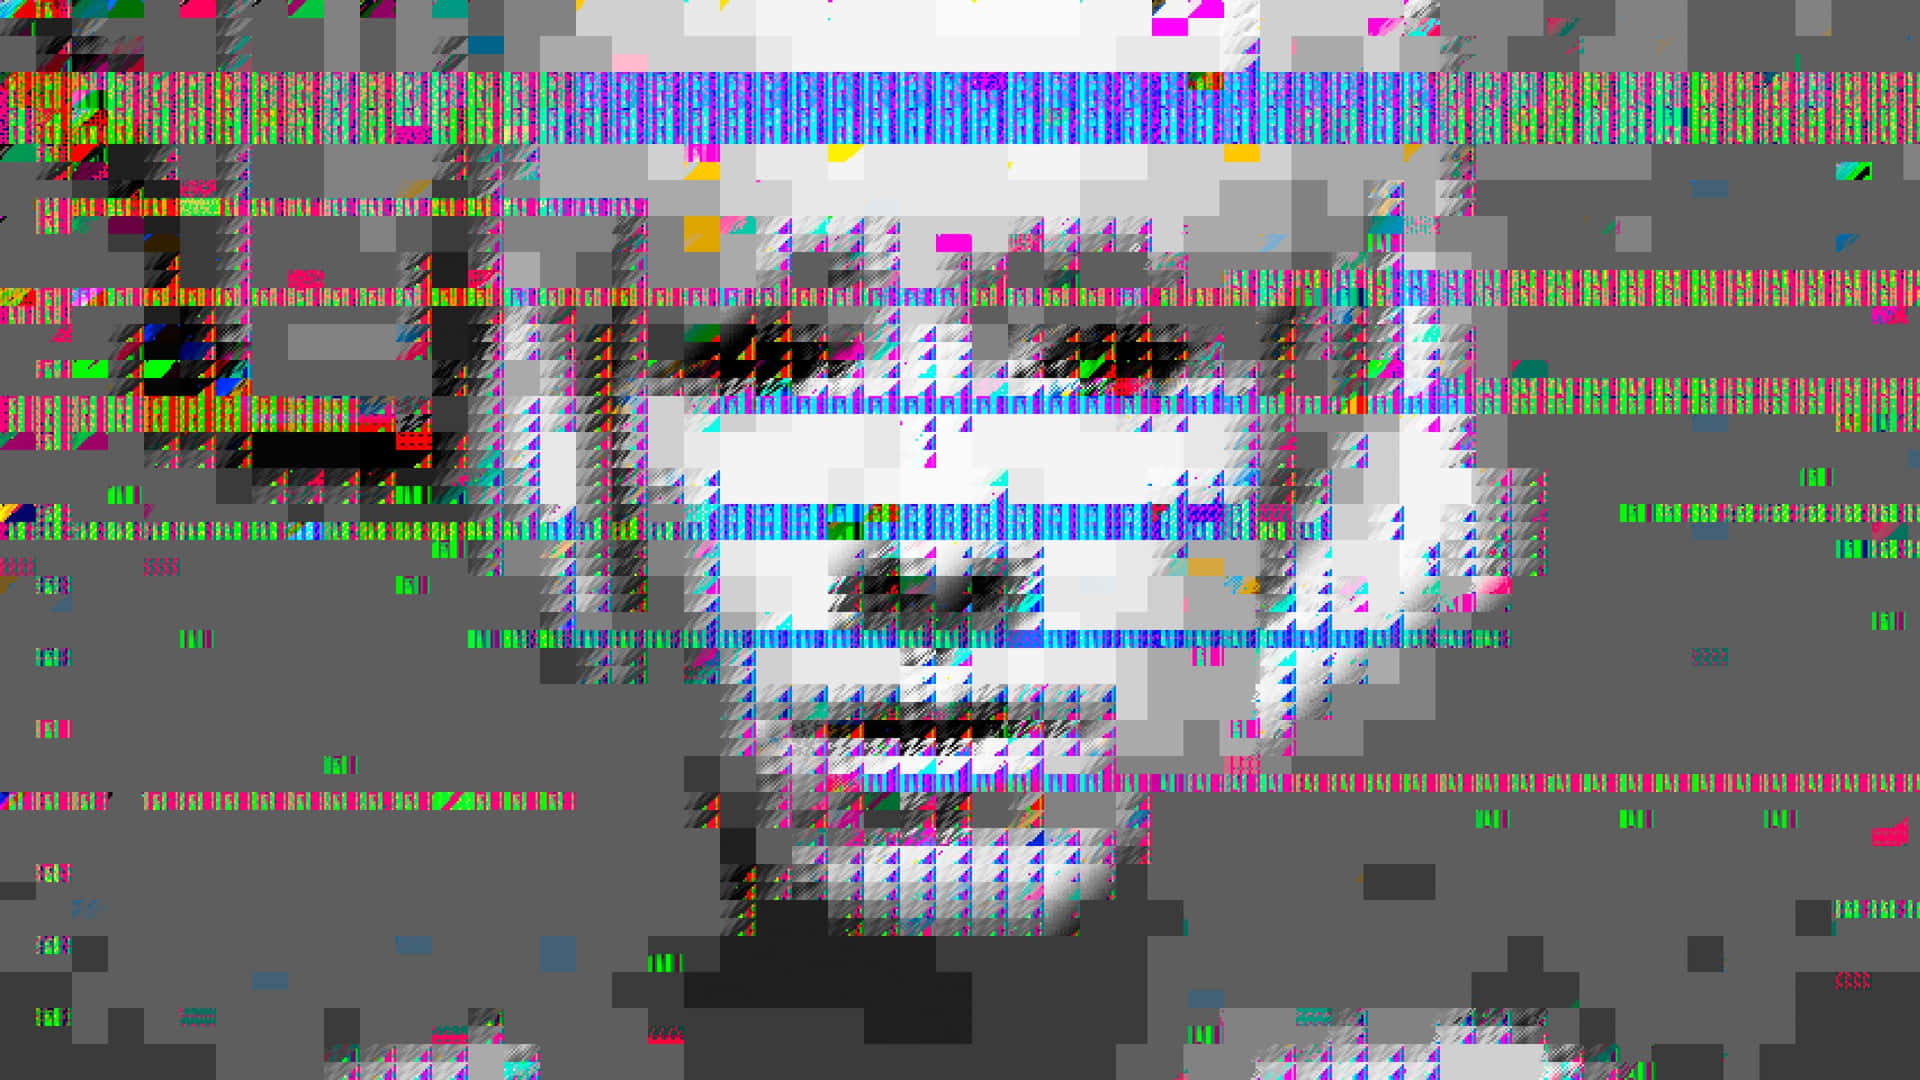 Get lost in the surreal world of Glitch